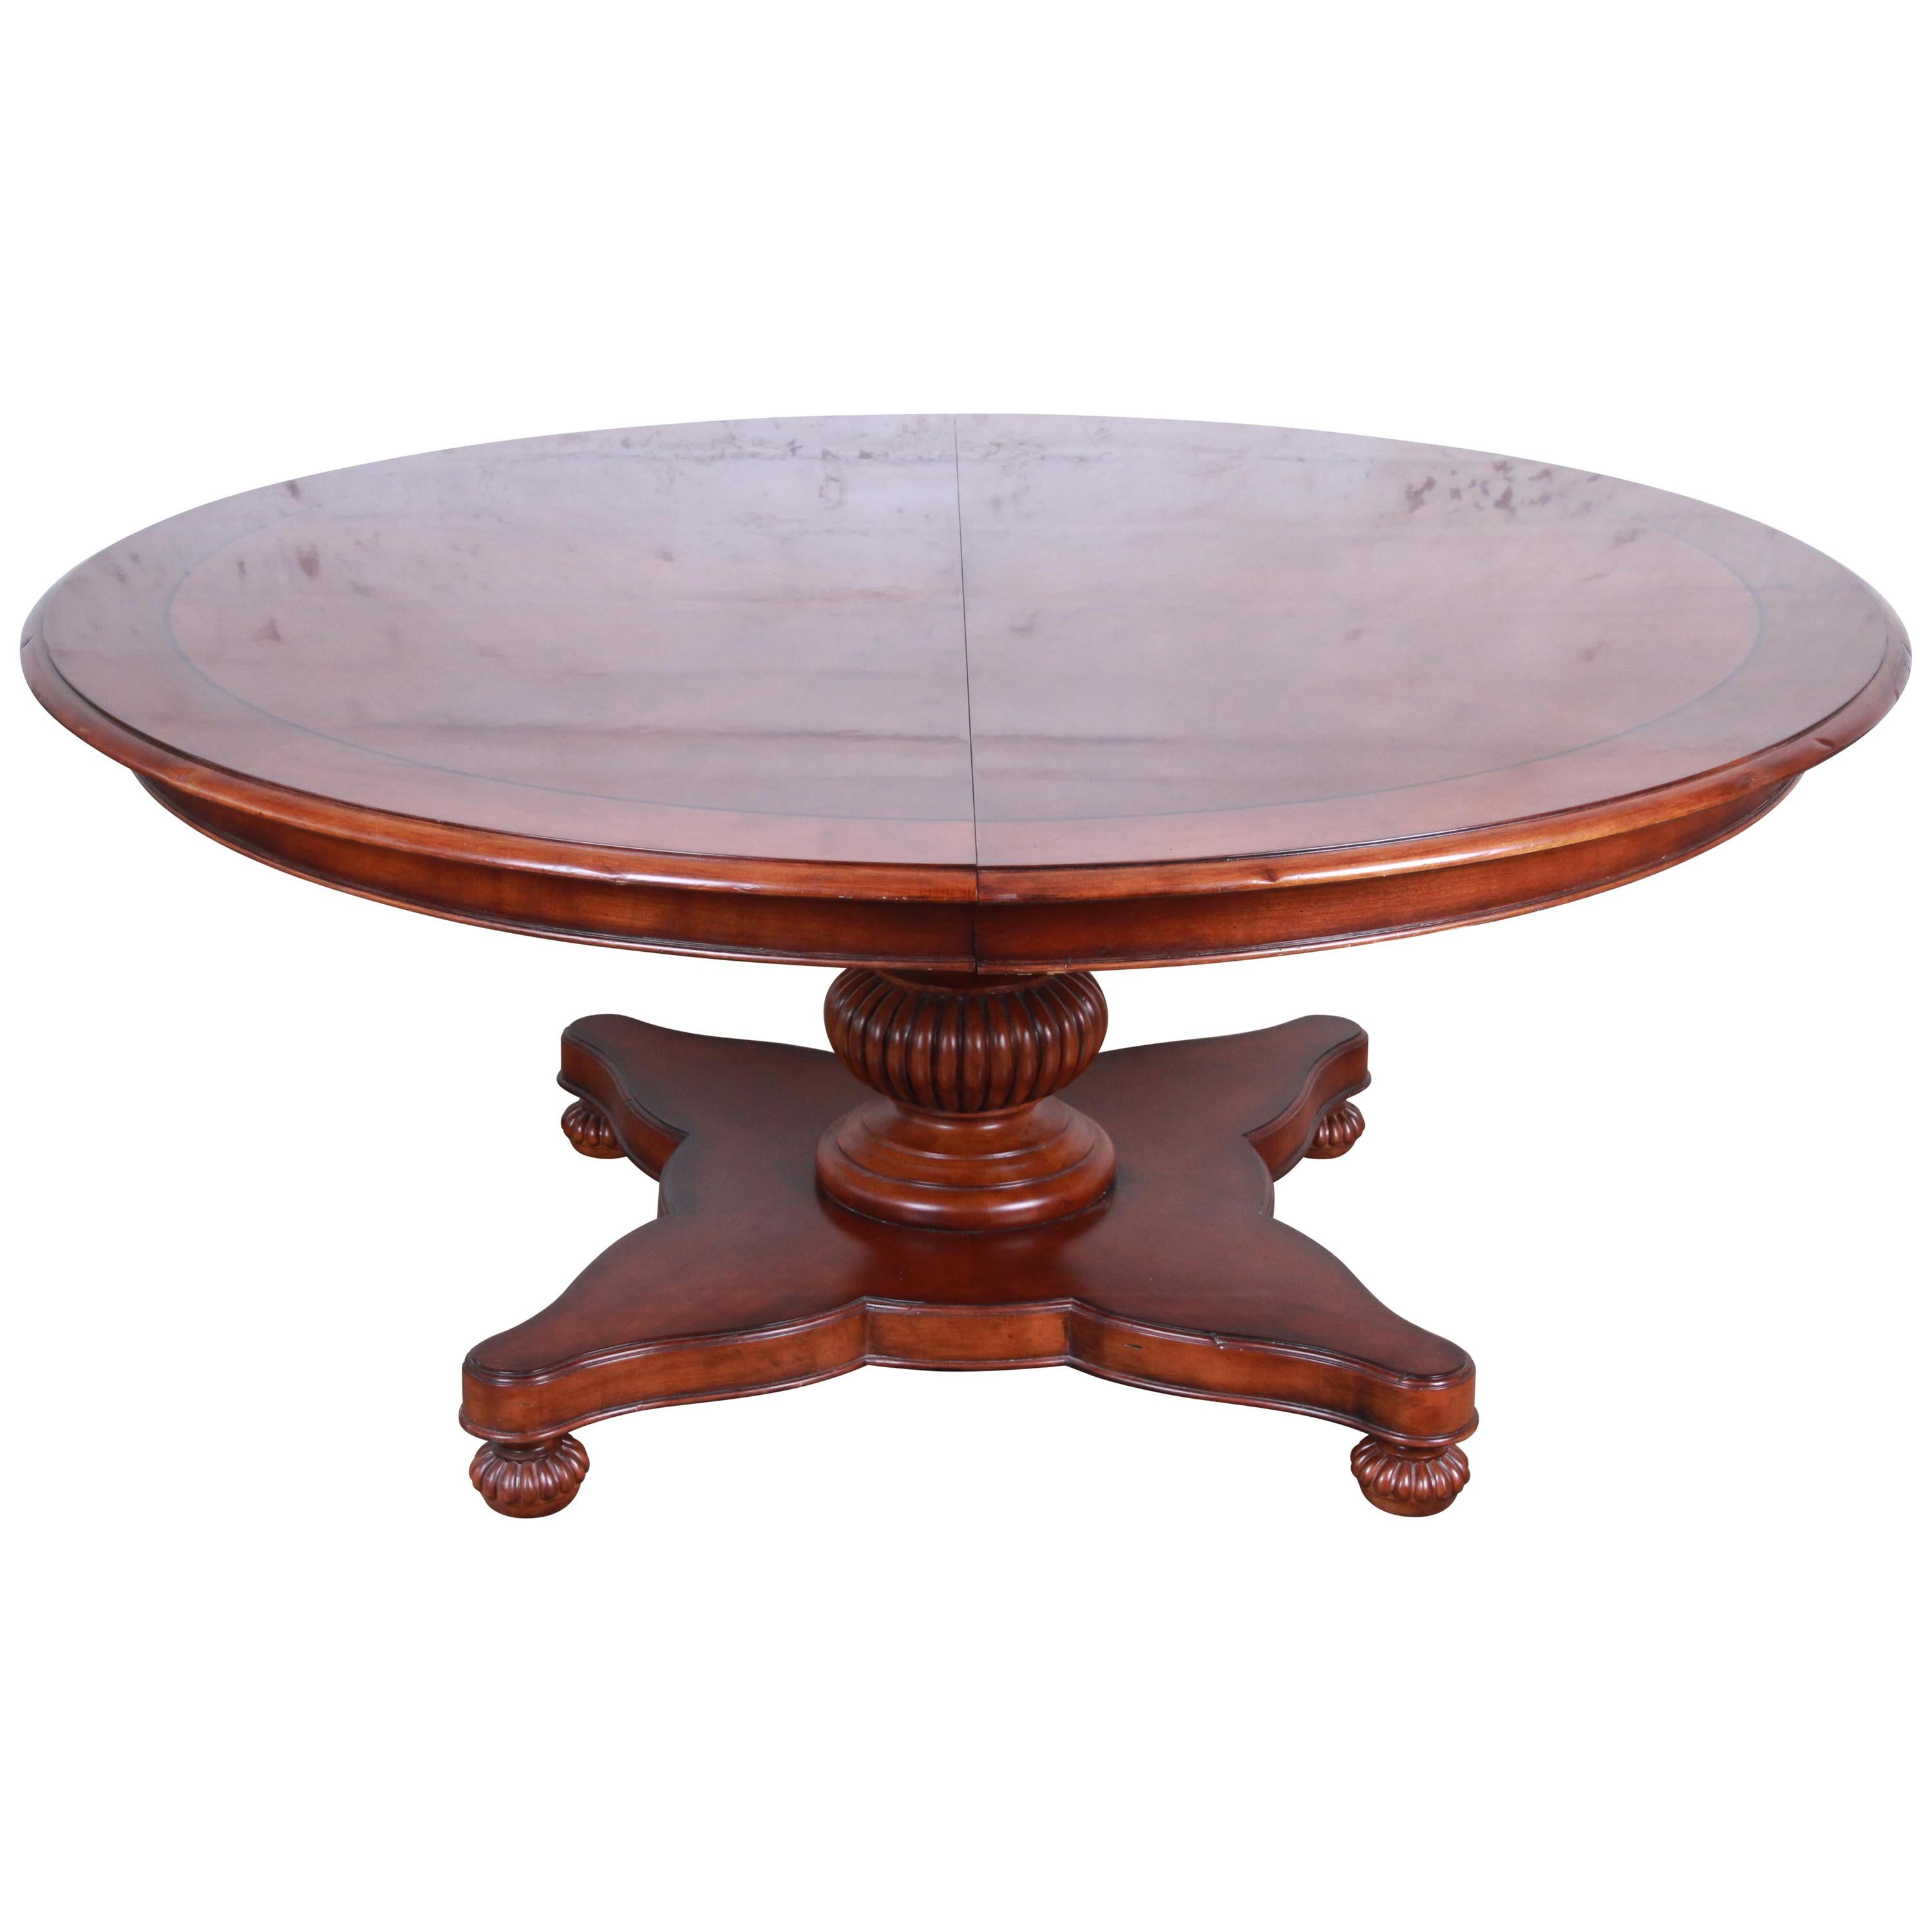 Baker Furniture Milling Road Neoclassical Banded Mahogany Pedestal Dining Table